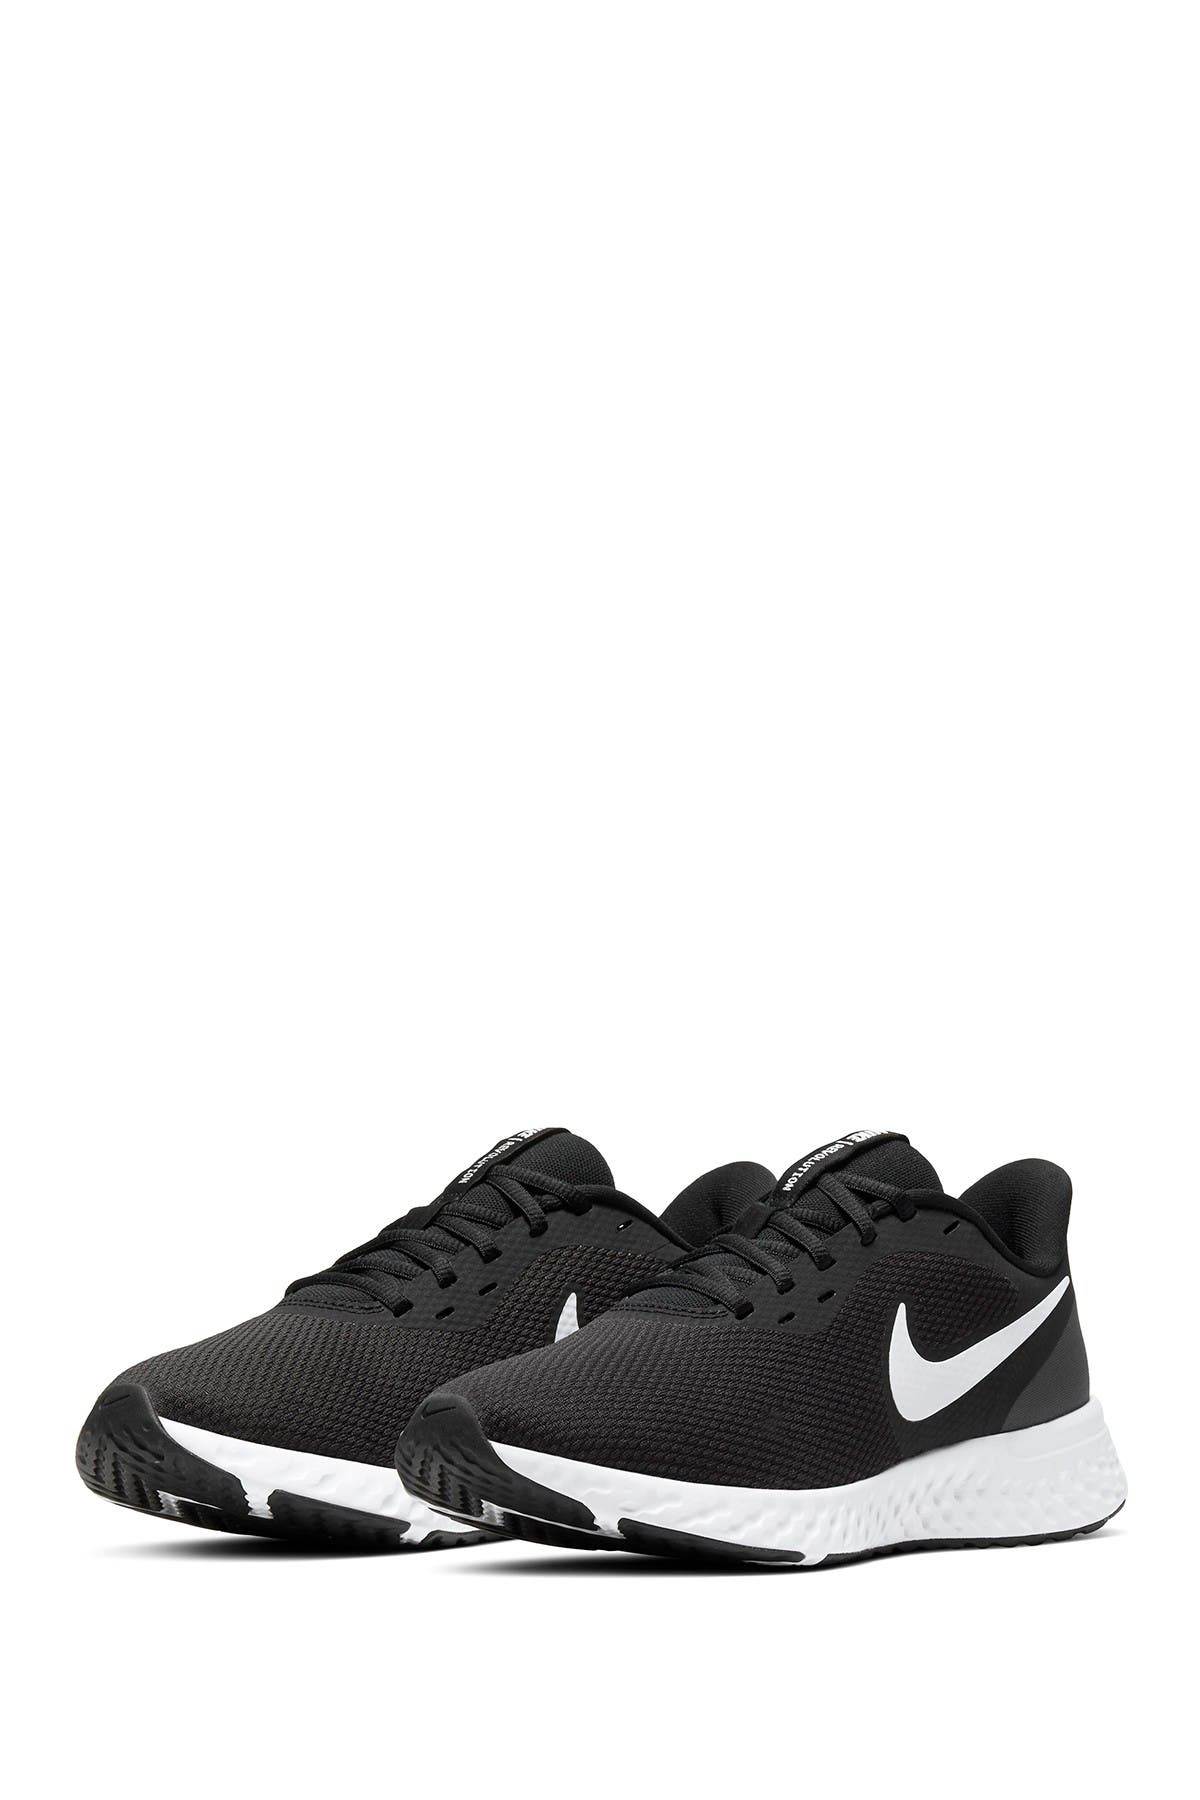 Buy > wide nike shoes > in stock